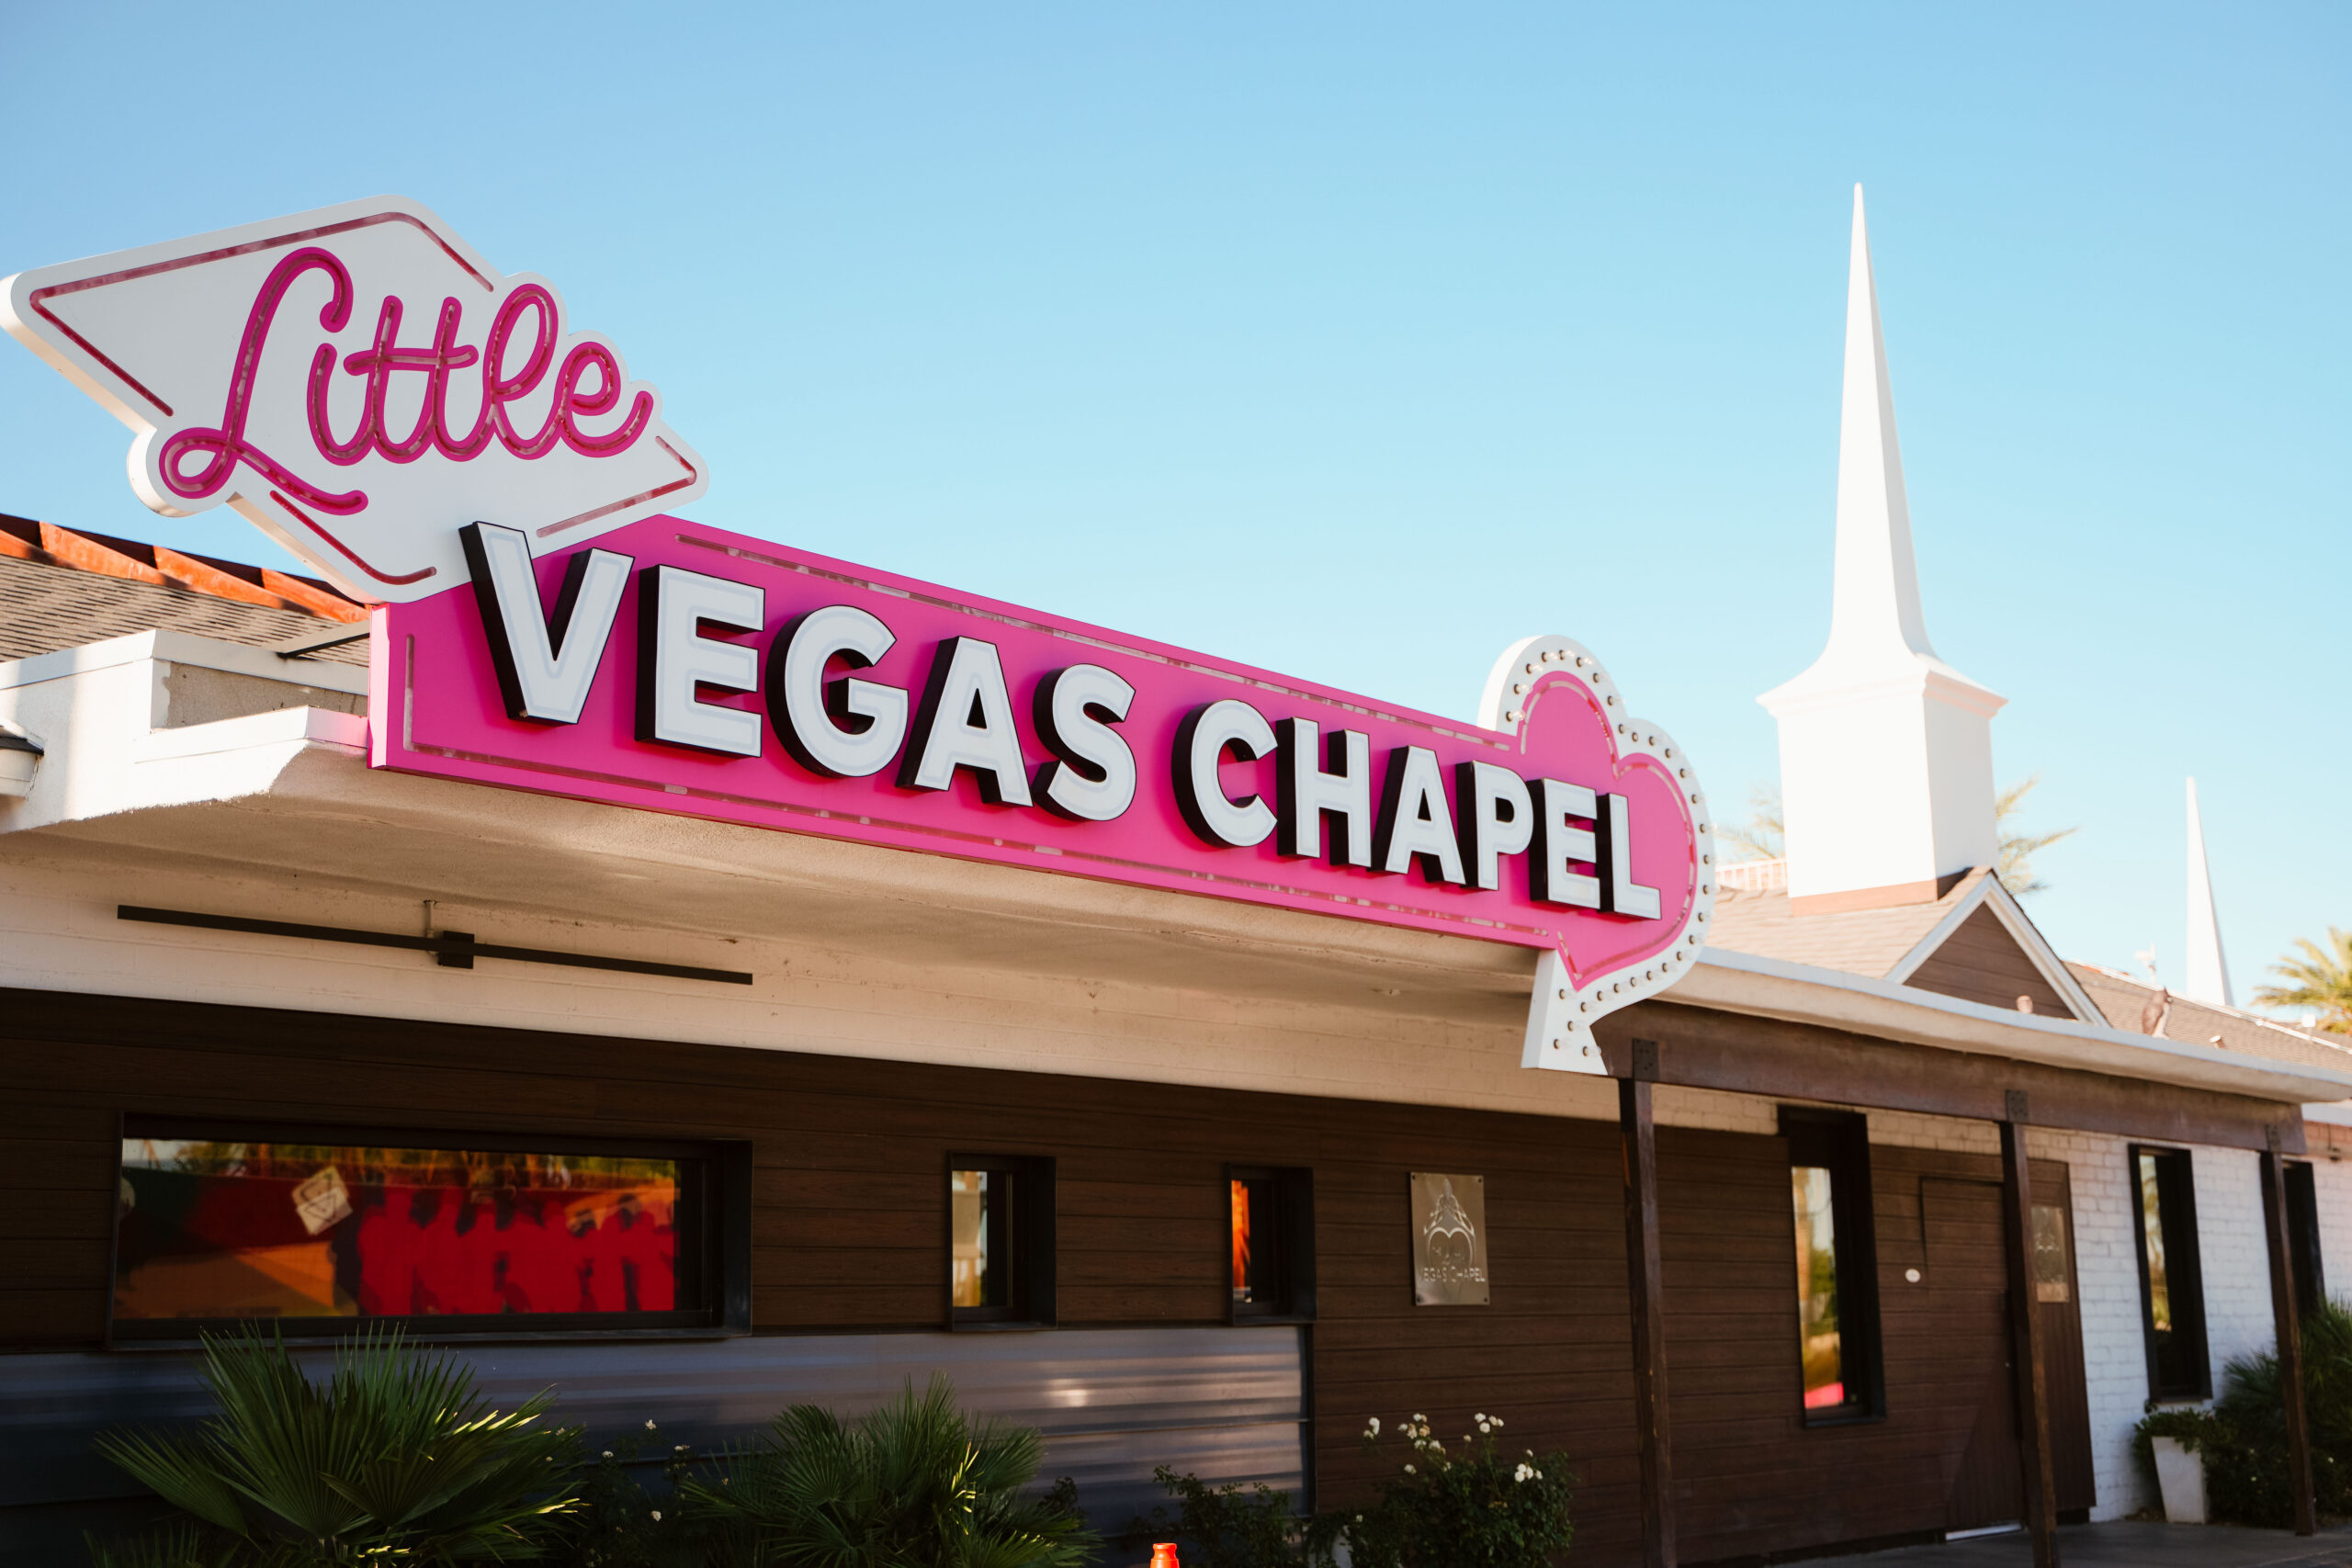 The Ultimate Vegas Wedding Experience: Interview with Elmer Turcios-Arriaza of The Little Vegas Chapel on Wedding Secrets Unveiled! Podcast